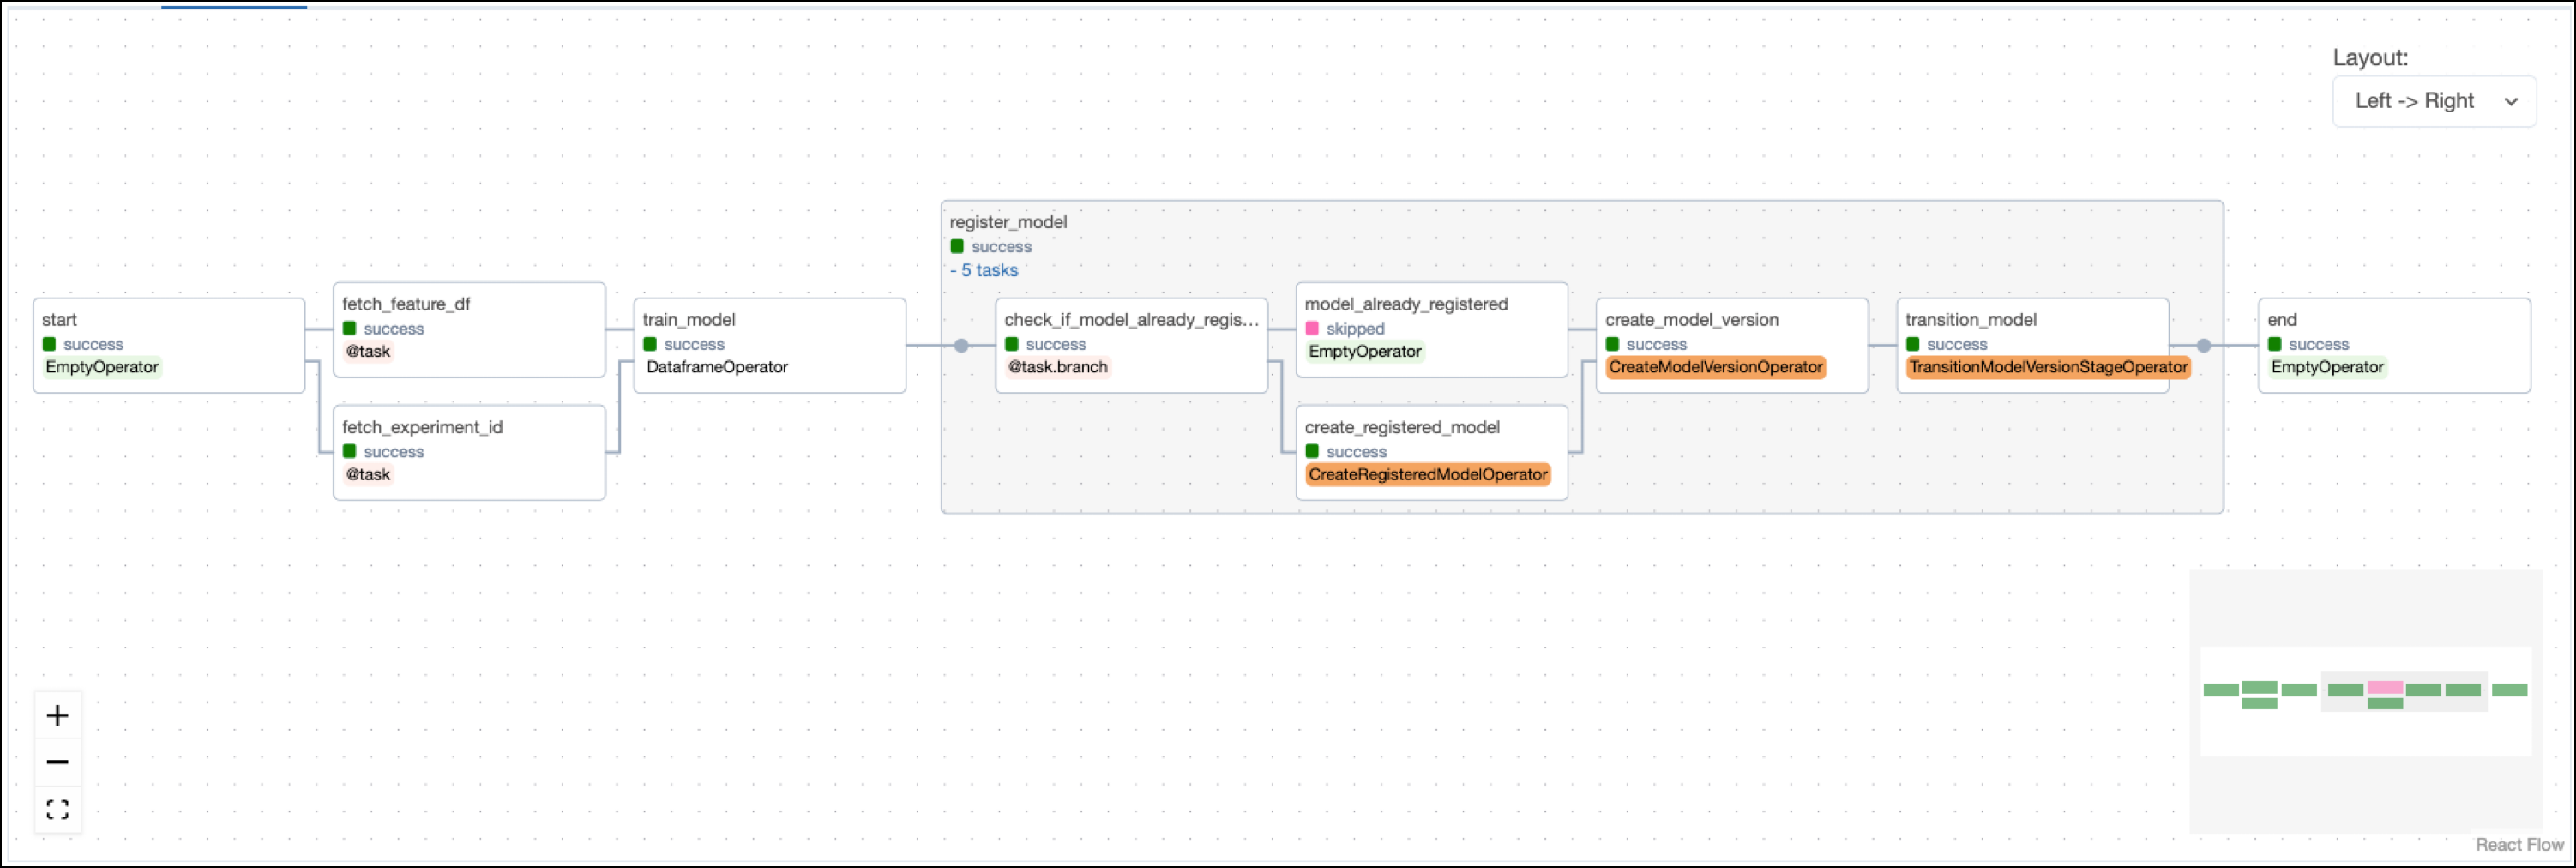 Graph view of the train DAG showing tasks fetching data and experiment information and training the model. Afterwards a task group contains tasks to register the model with MLflow, create a model version and transition the model version.